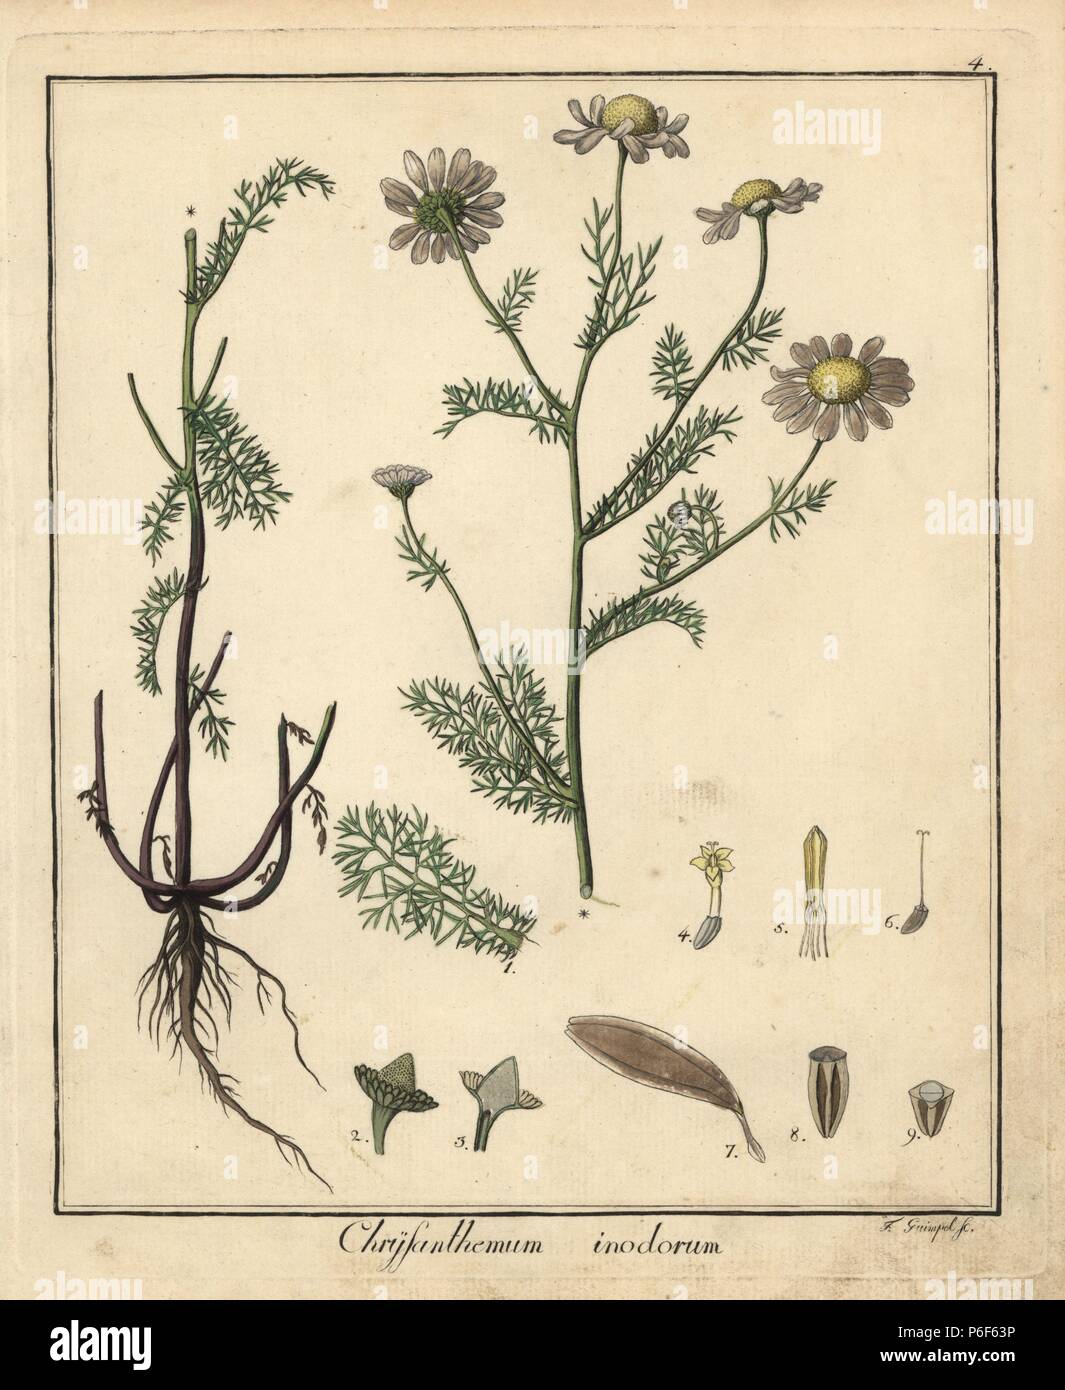 Sea mayweed, Tripleurospermum maritimum. Handcoloured copperplate engraving by F. Guimpel from Dr. Friedrich Gottlob Hayne's Medical Botany, Berlin, 1822. Hayne (1763-1832) was a German botanist, apothecary and professor of pharmaceutical botany at Berlin University. Stock Photo